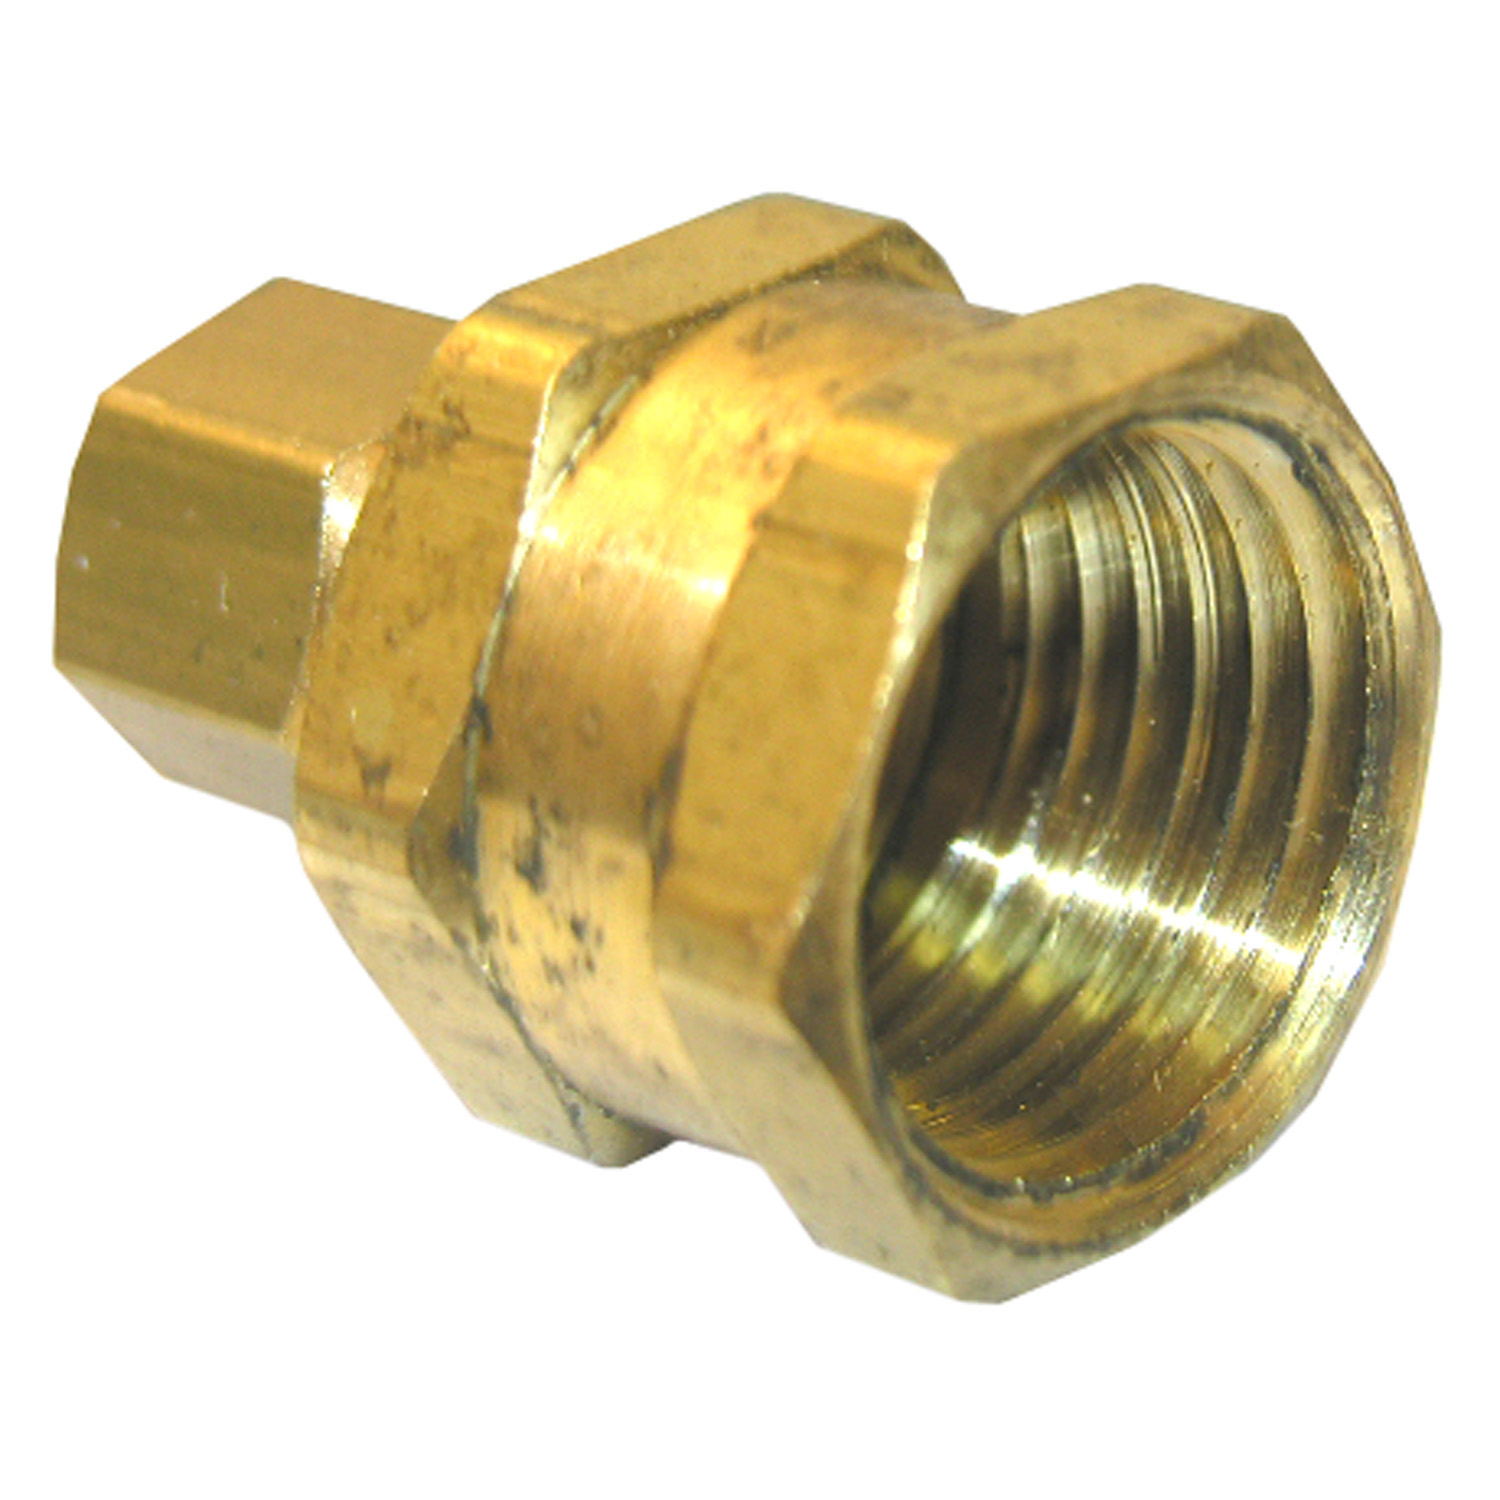 17-6623 Pipe Adapter, 5/16 x 1/4 in, Compression x FPT, Brass, 150 psi Pressure